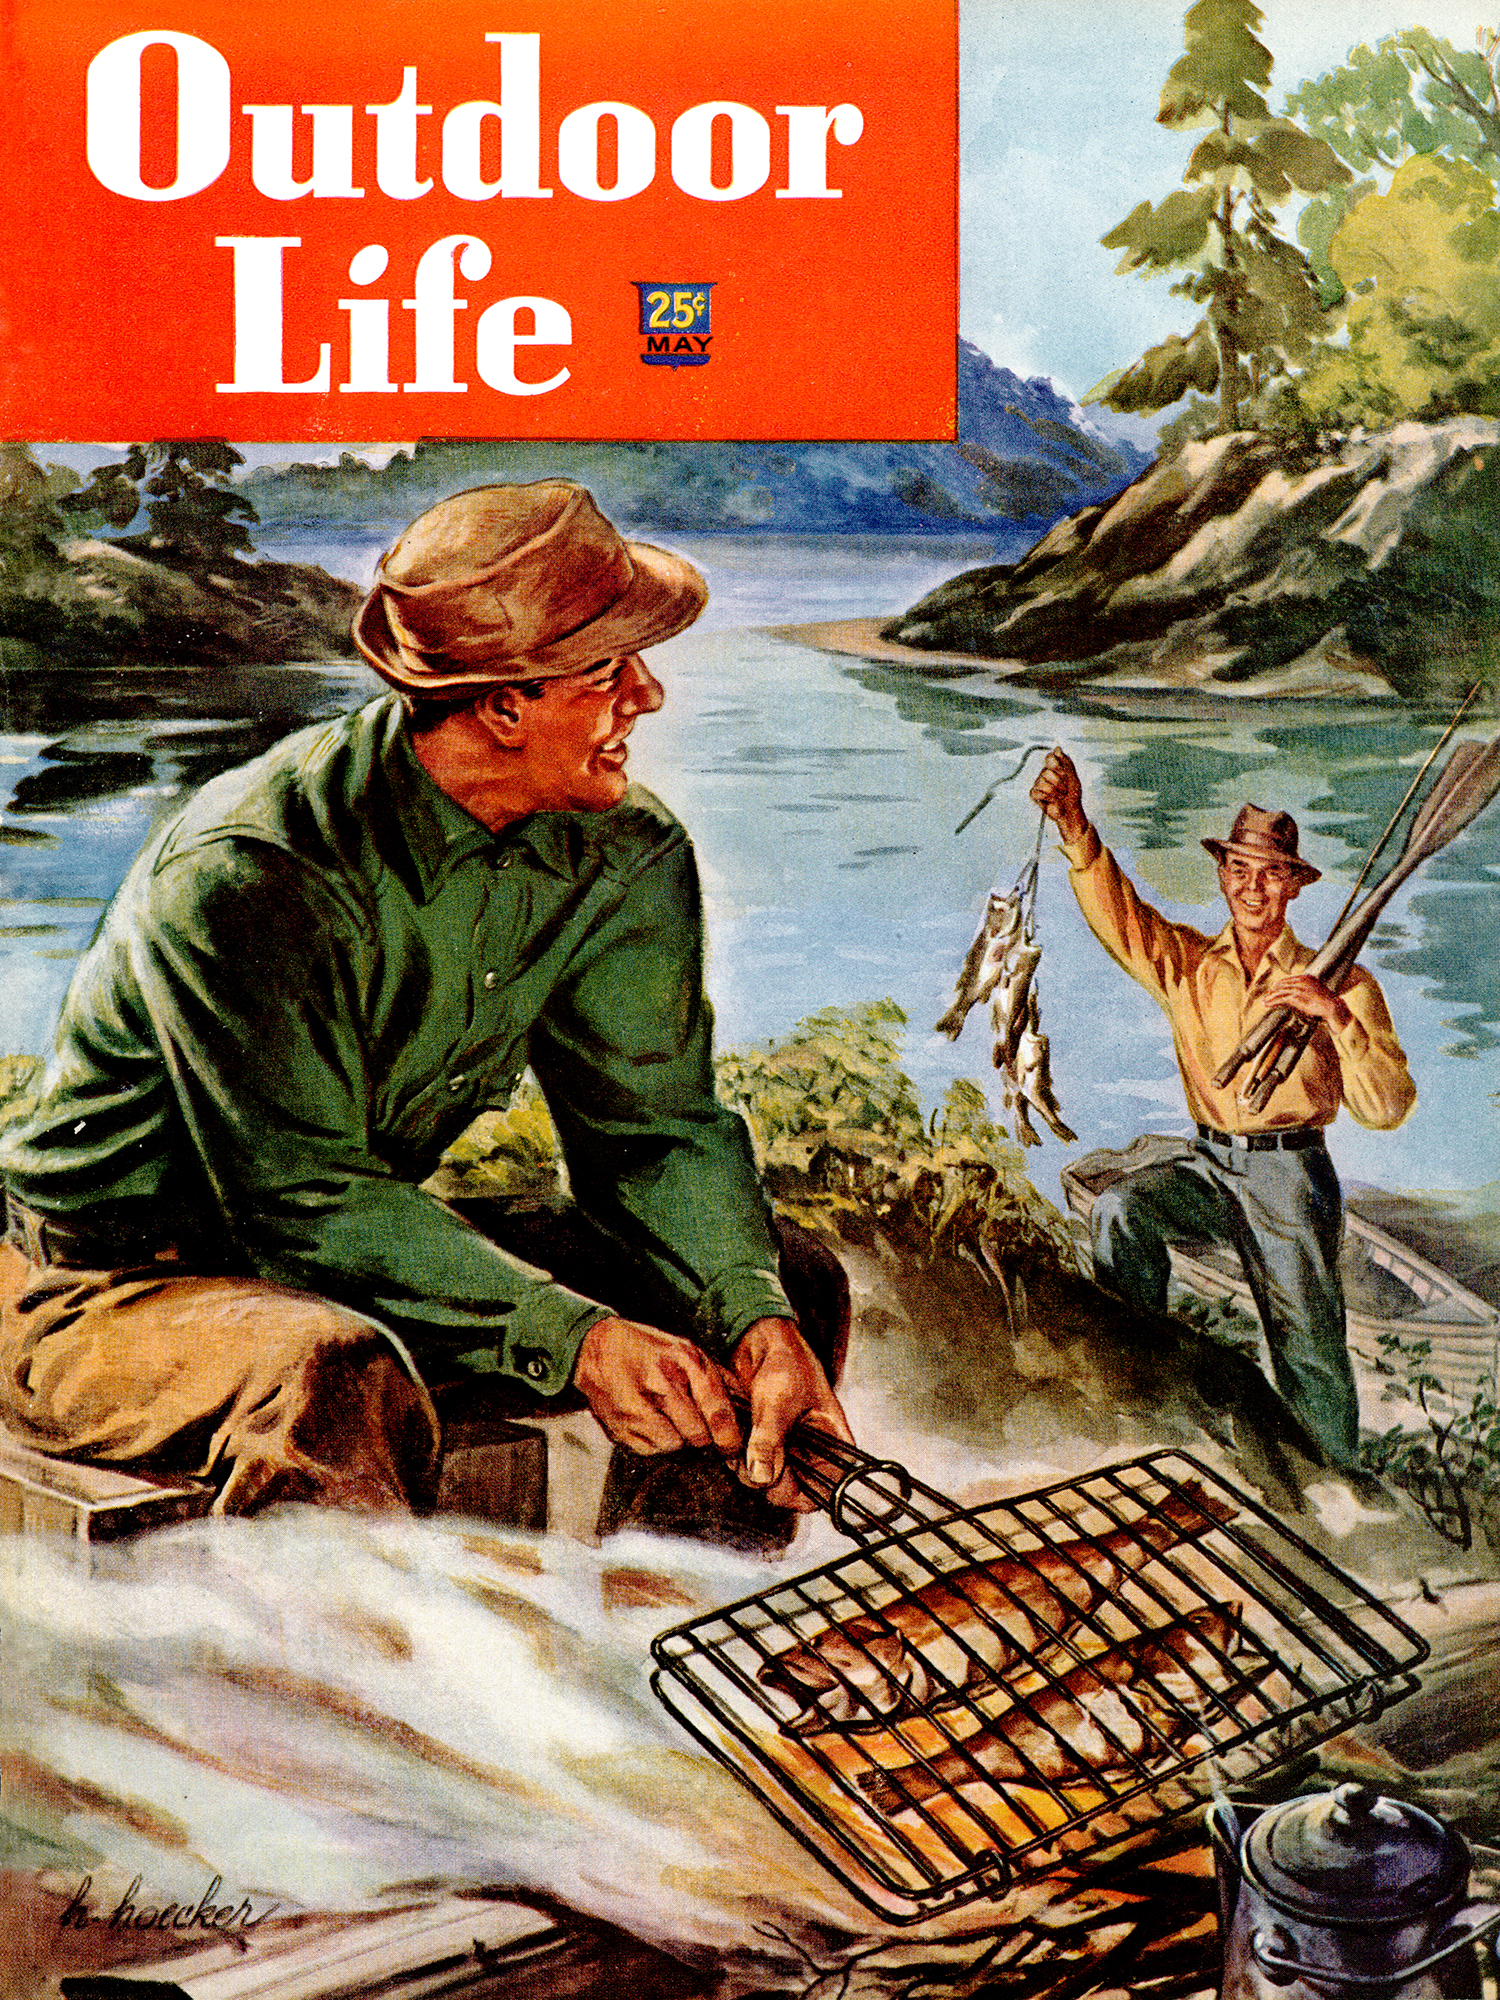 outdoor life cover from may 1948 showing two fishermen, one grilling, and one arriving with fish